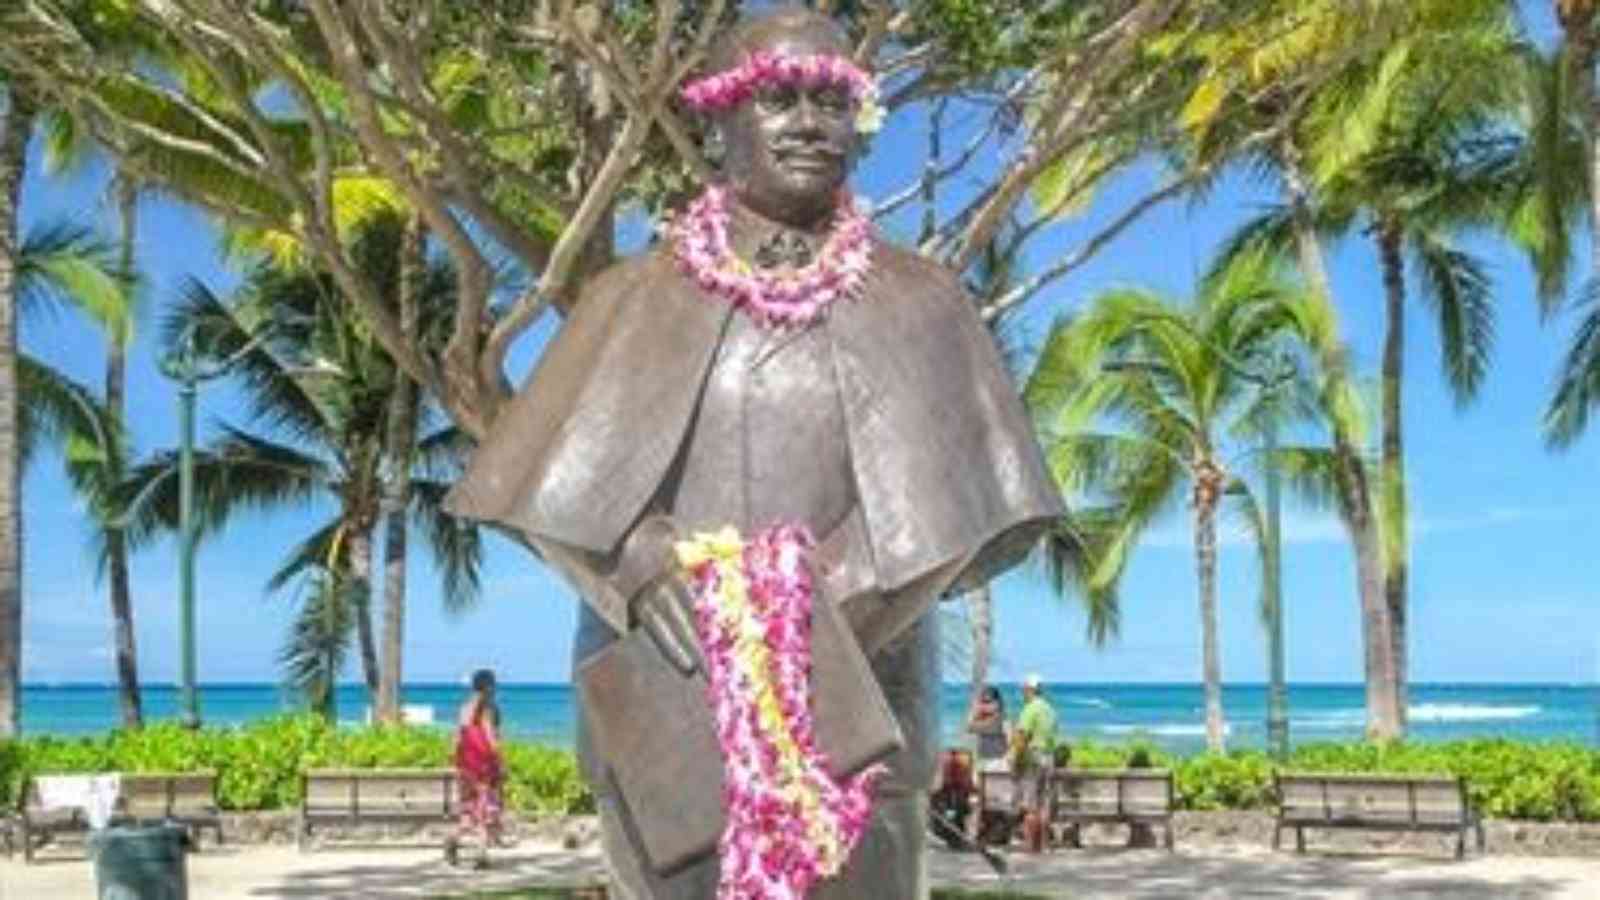 Prince Kuhio Day 2023: Date, History, Things about Prince Kuhio